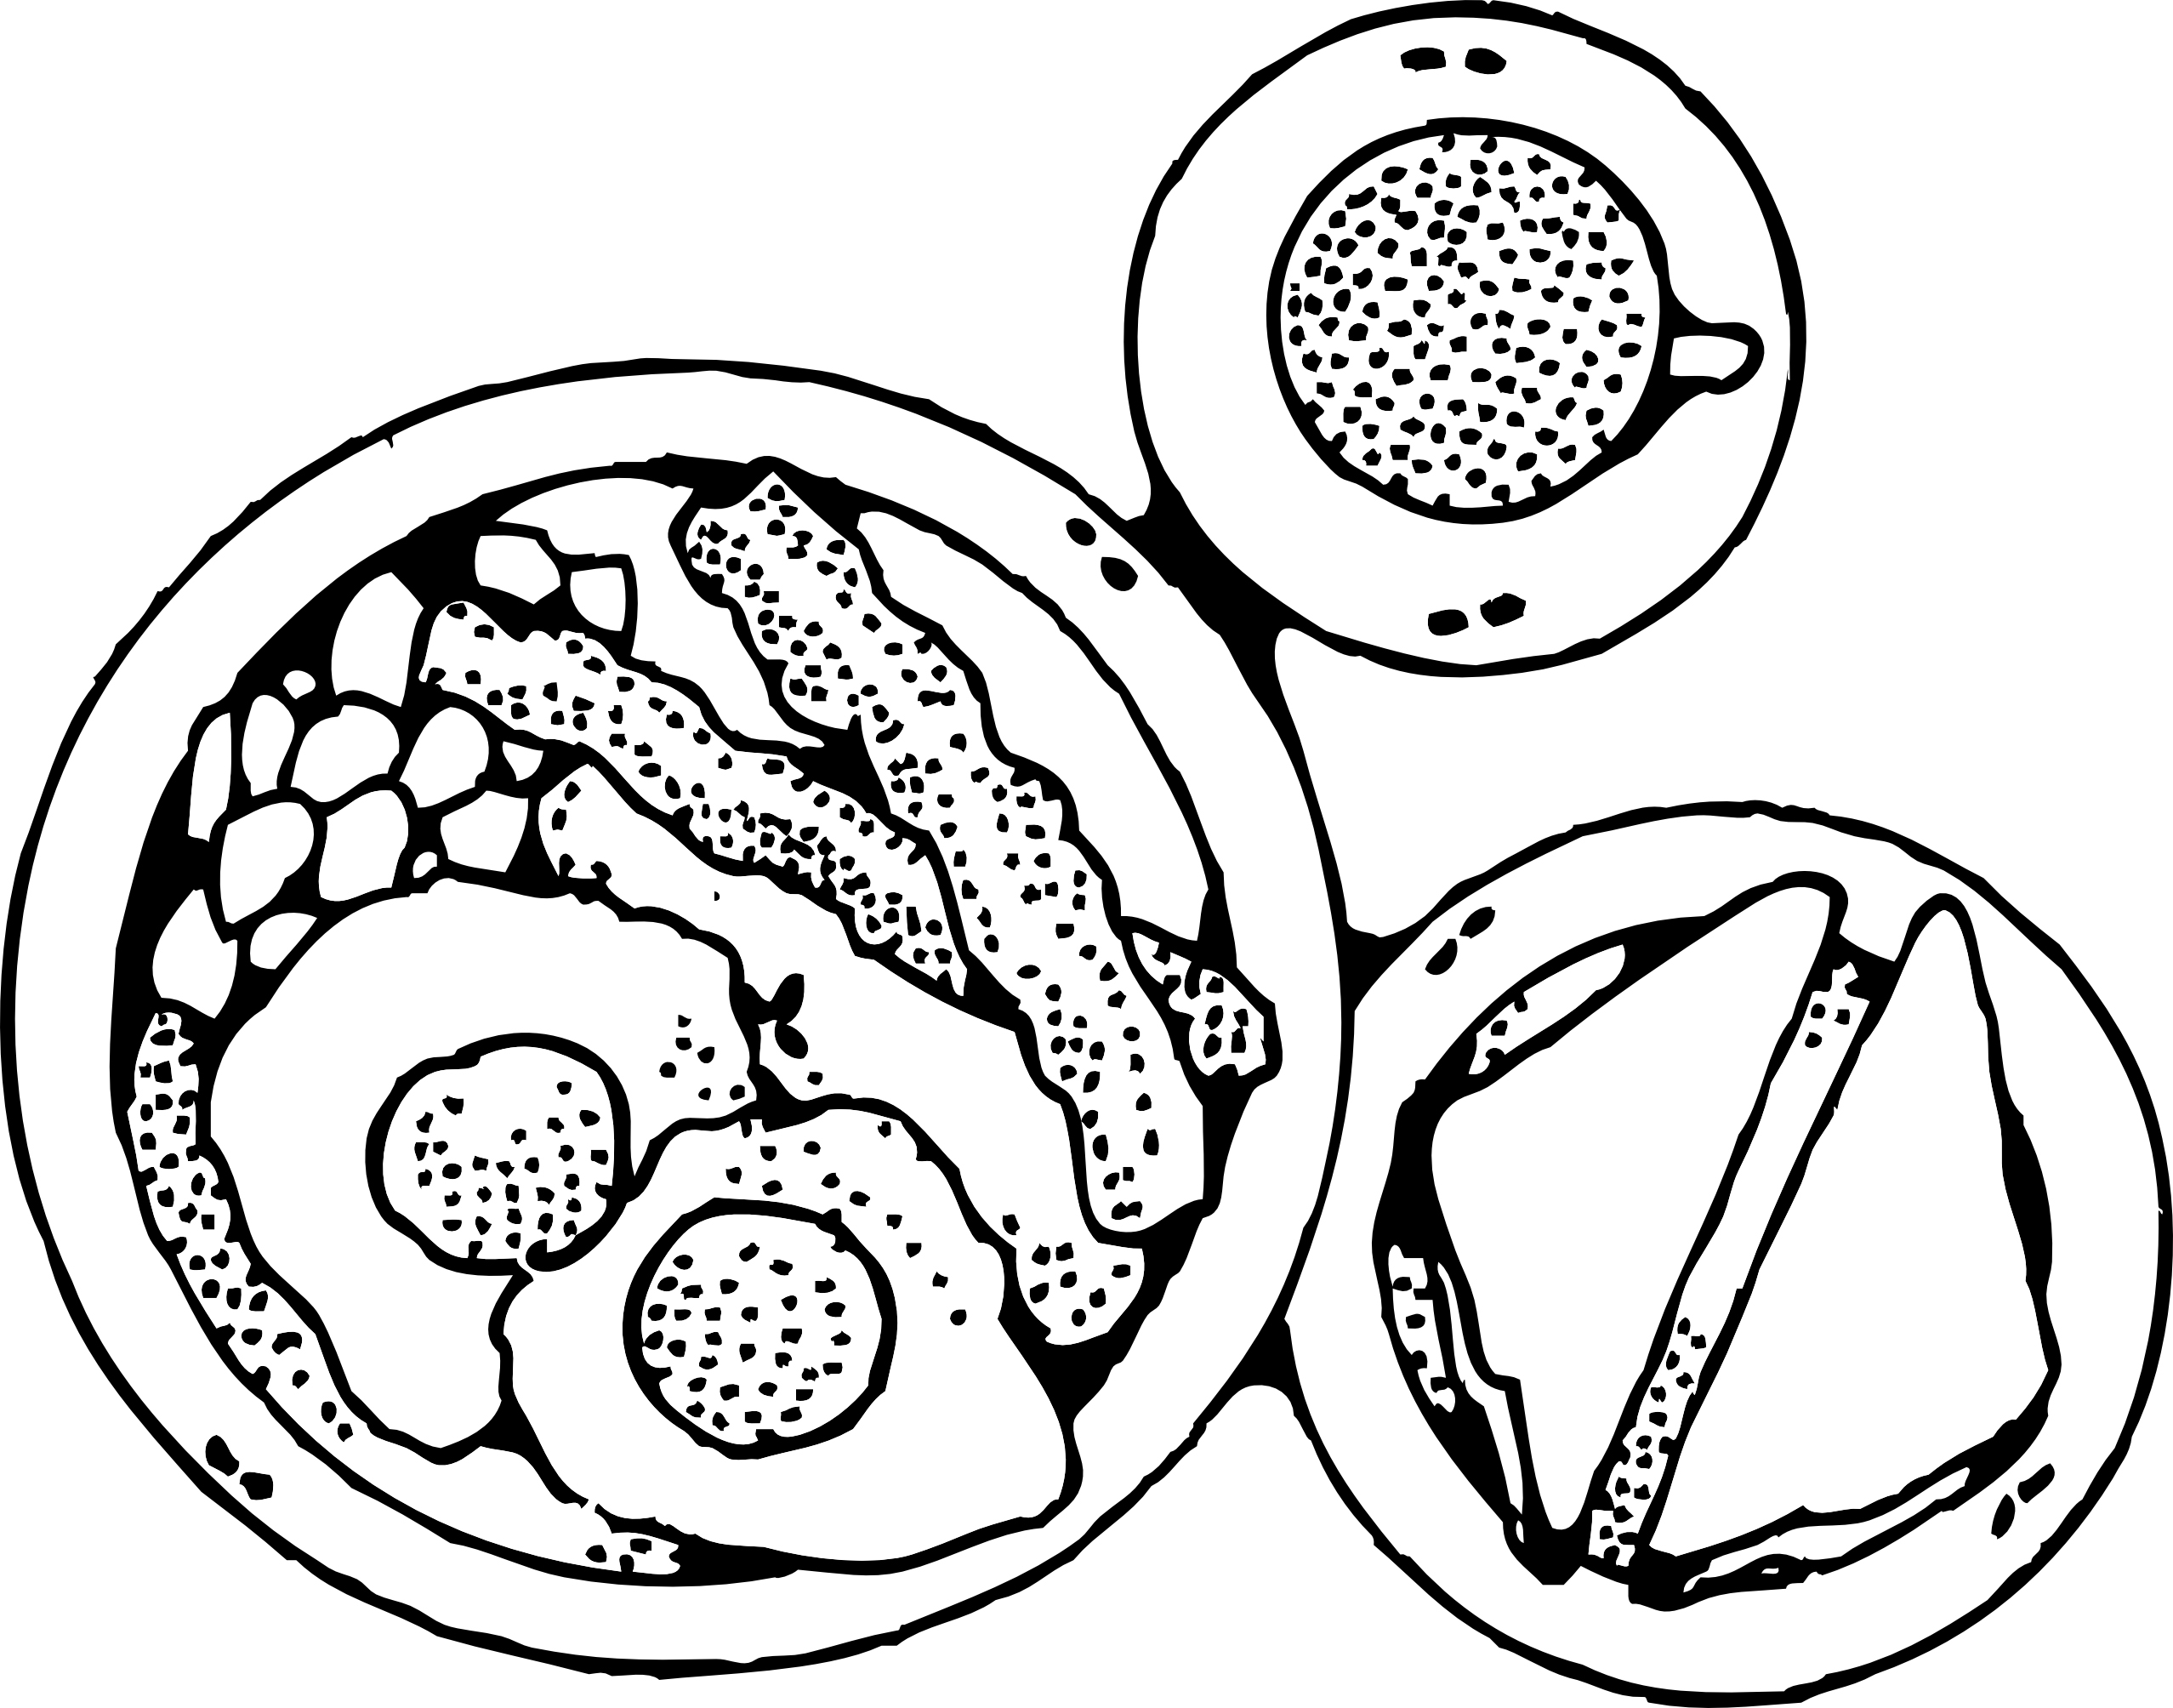 Full Balanced Breakfast Coloring Page